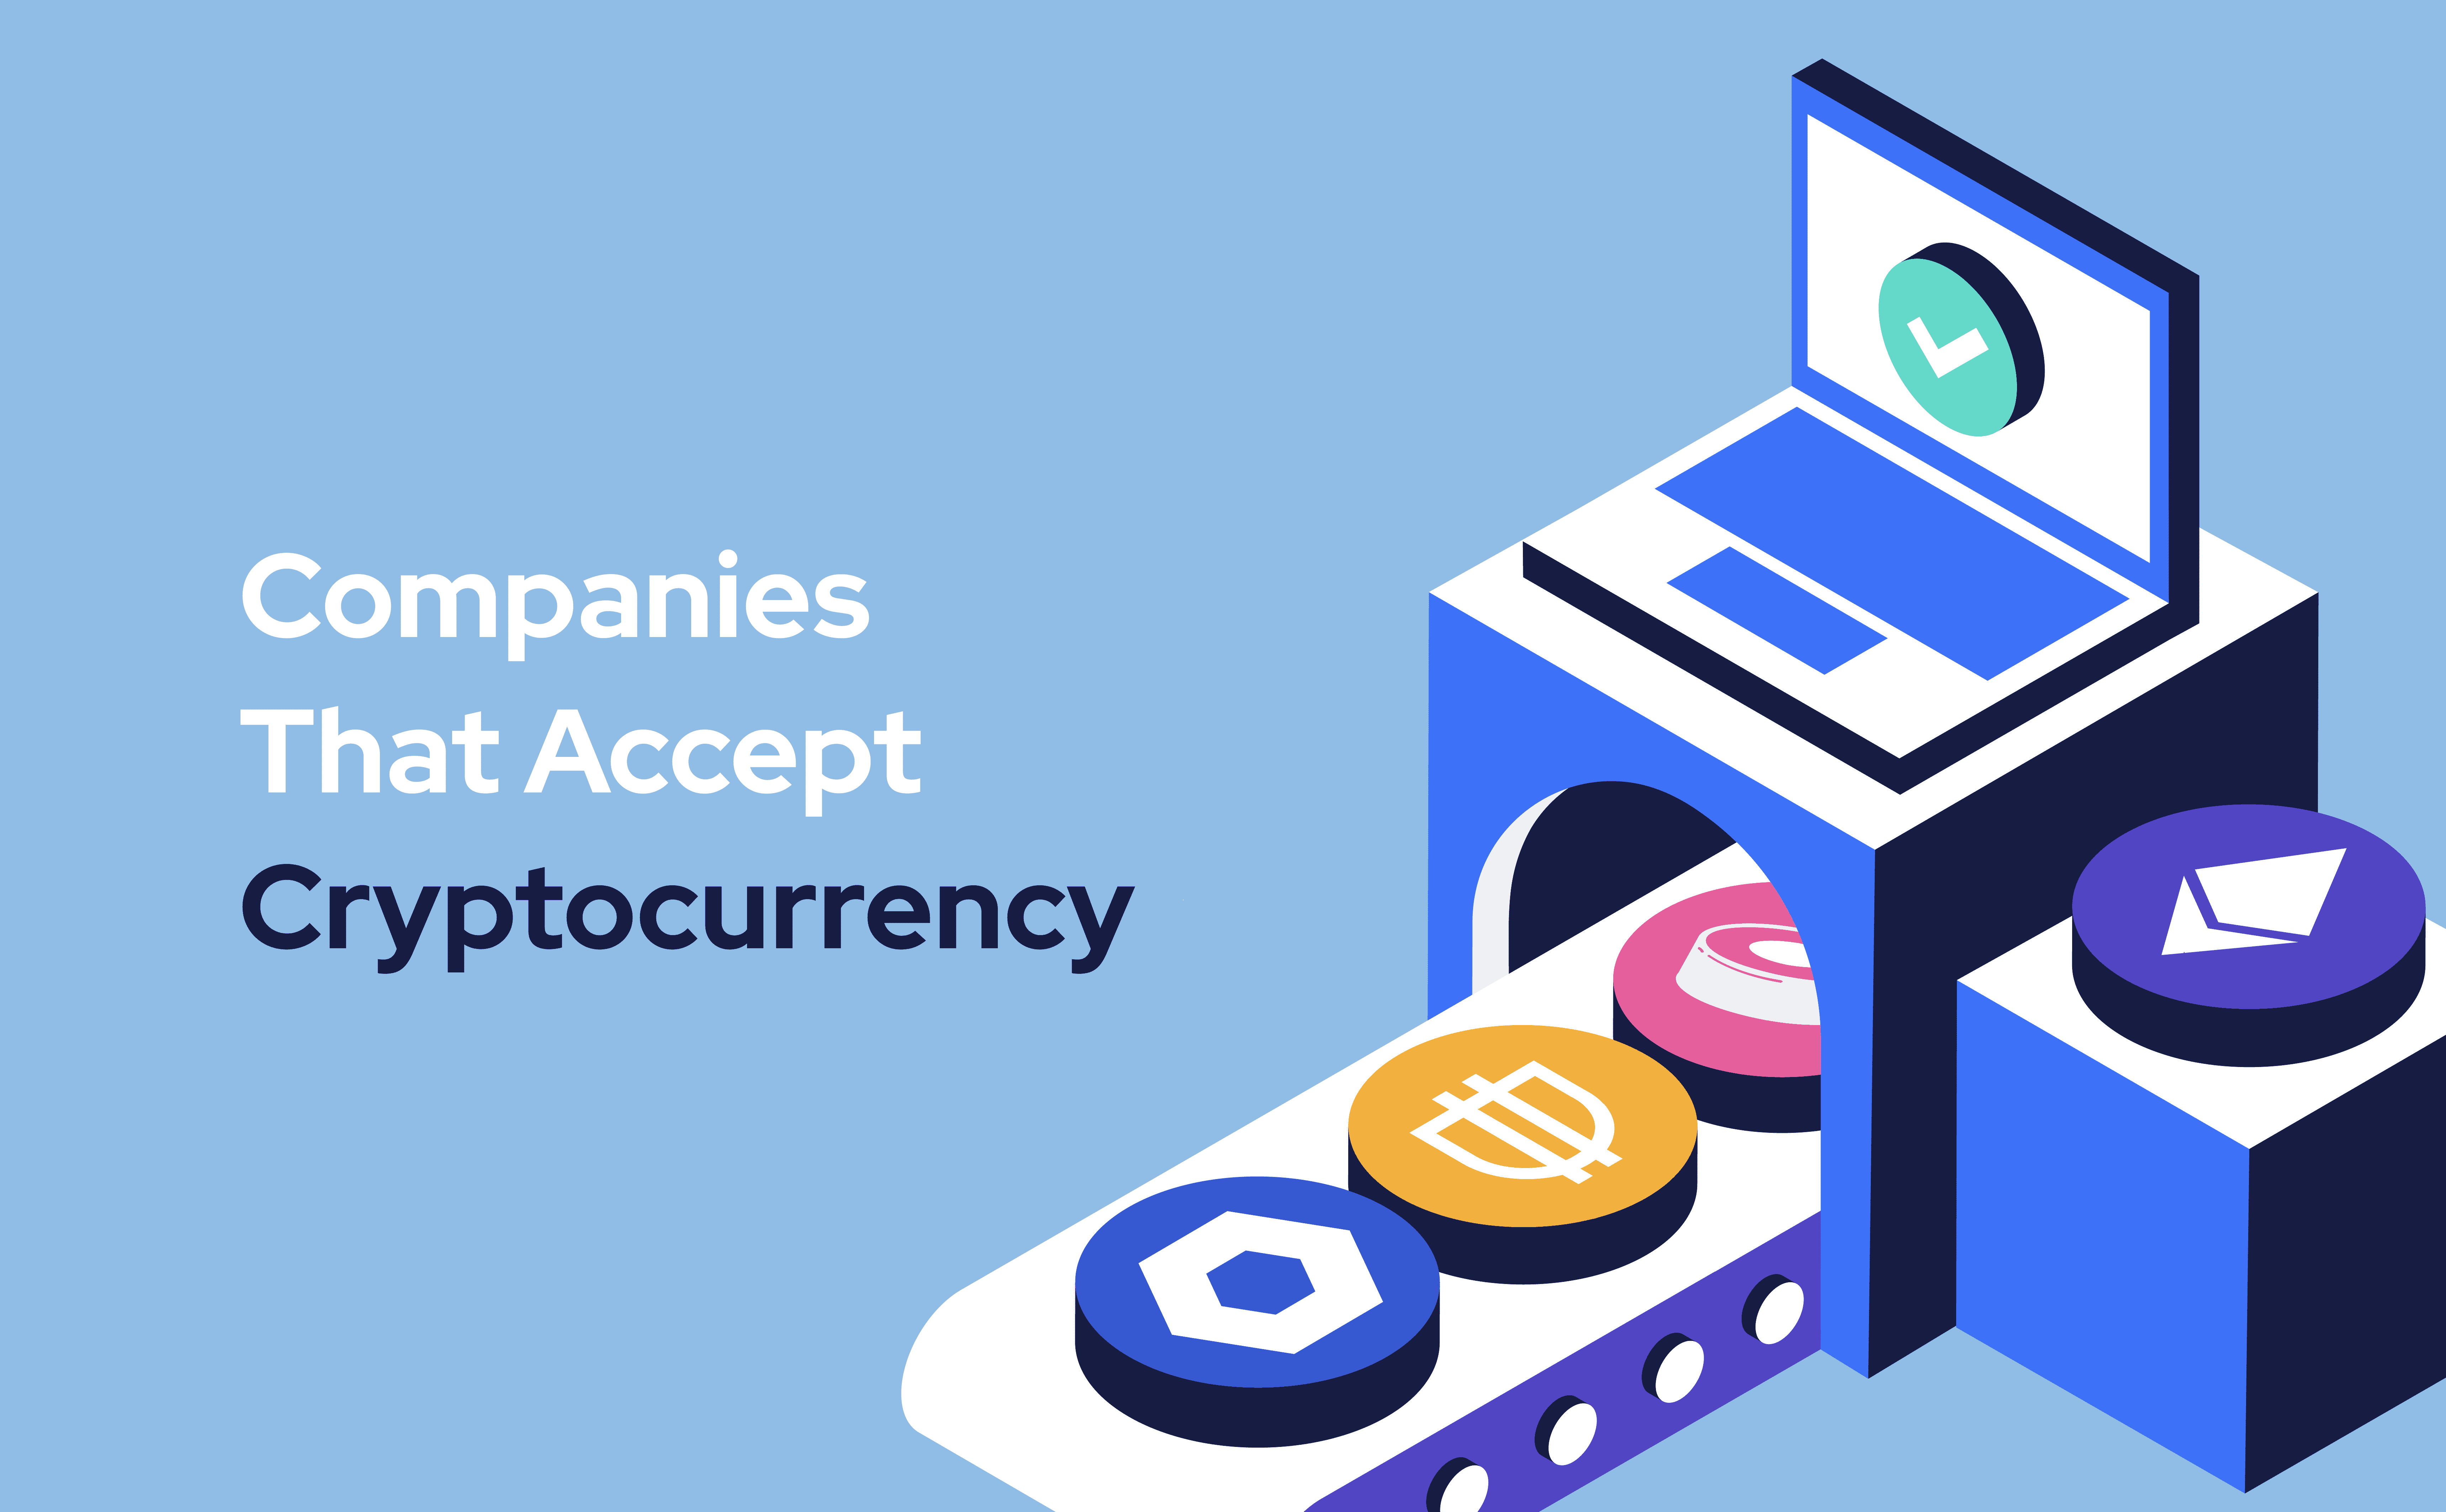 Companies that accept cryptocurrency